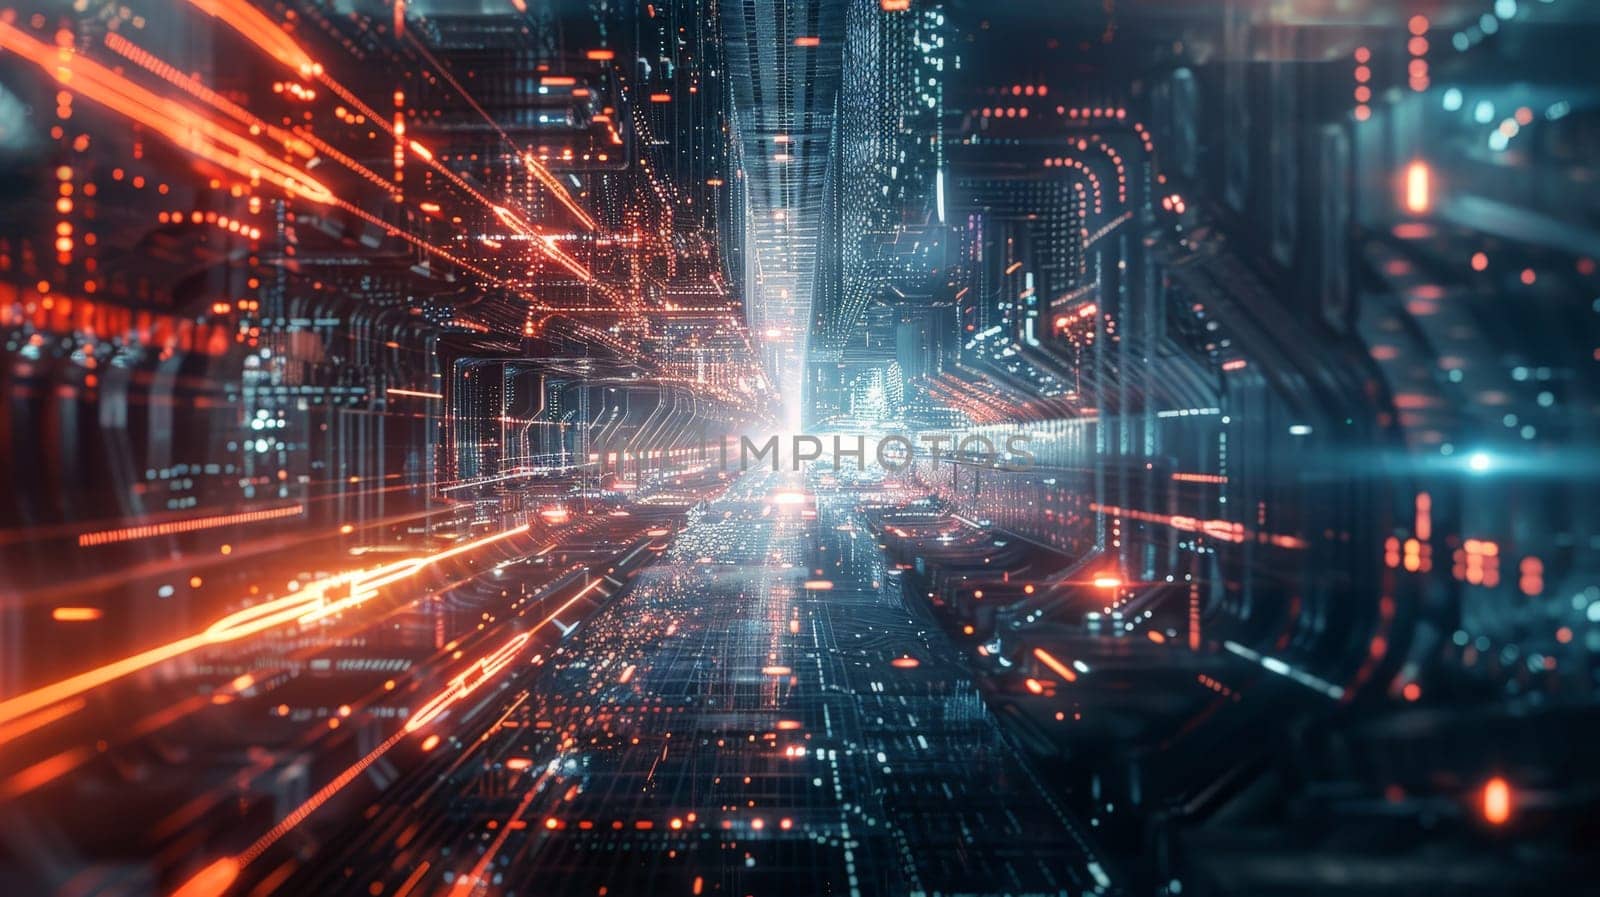 A futuristic cityscape with a bright orange and blue light show. The lights are scattered throughout the scene, creating a sense of movement and energy. Scene is one of excitement and wonder